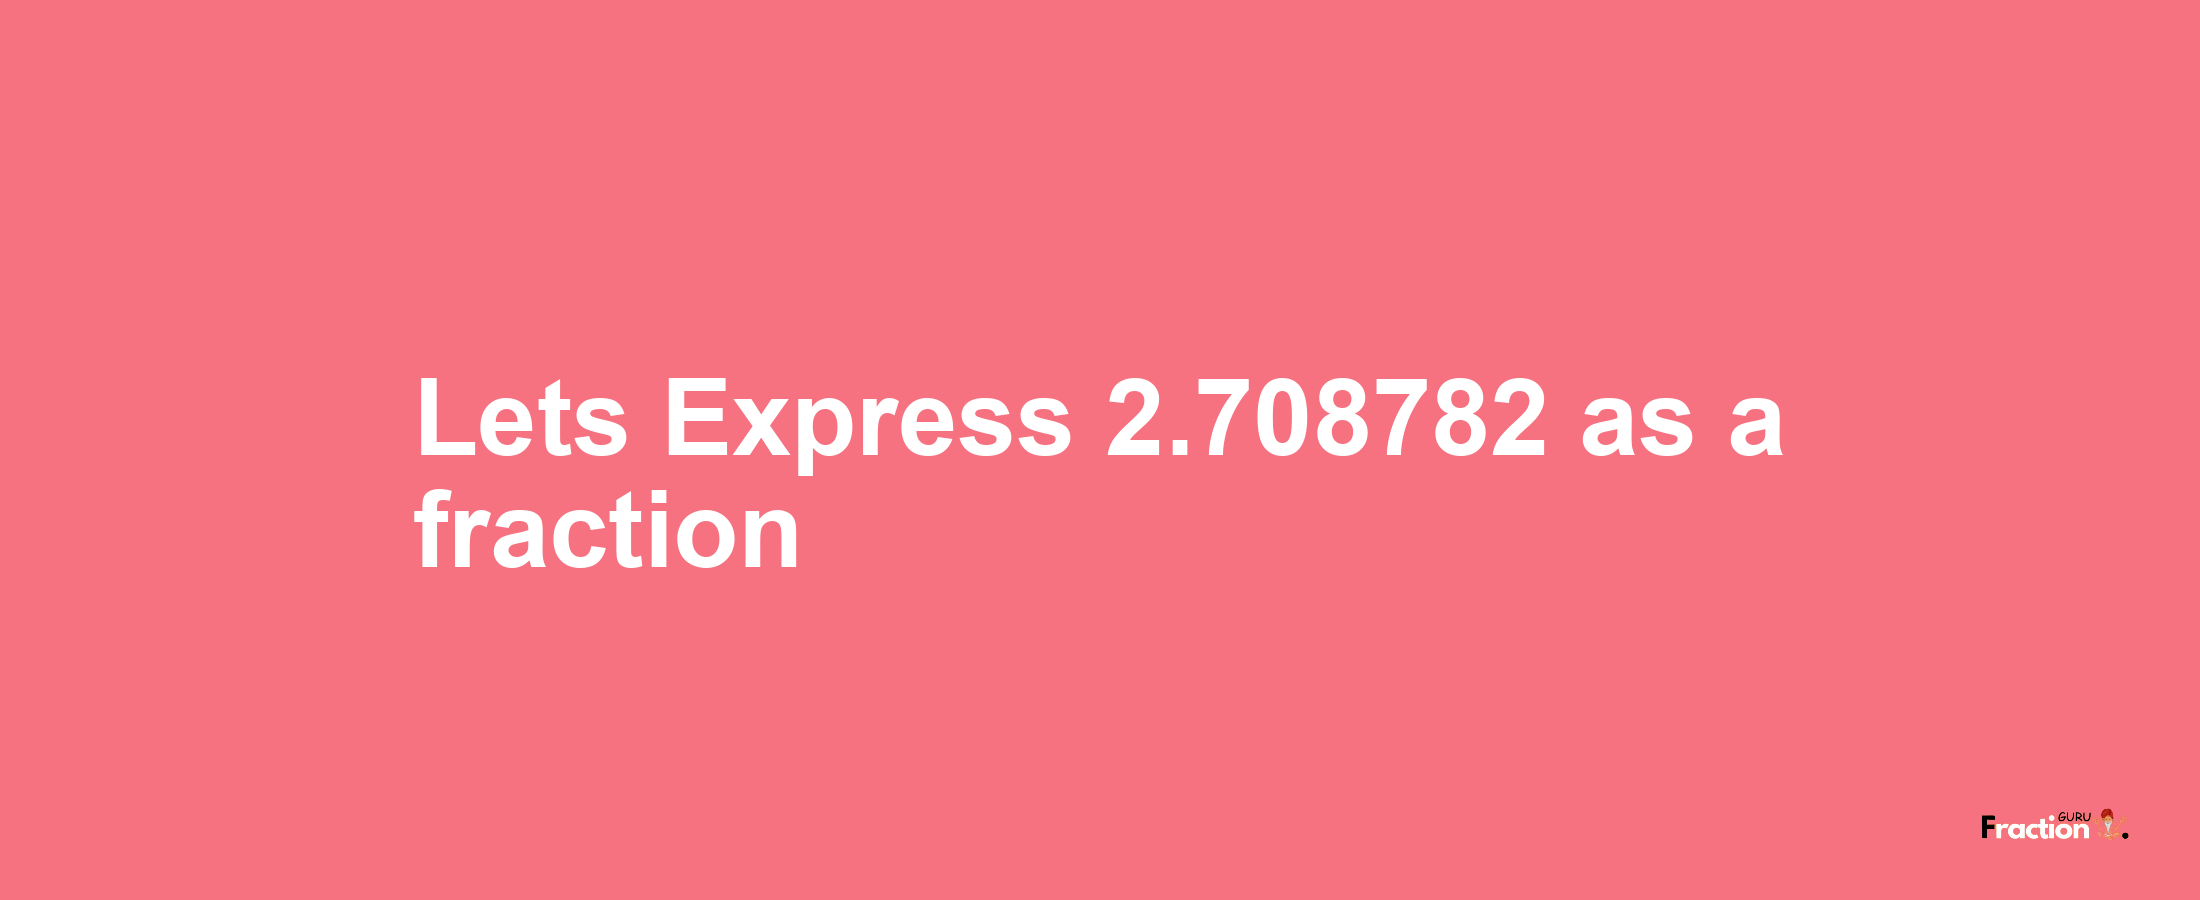 Lets Express 2.708782 as afraction